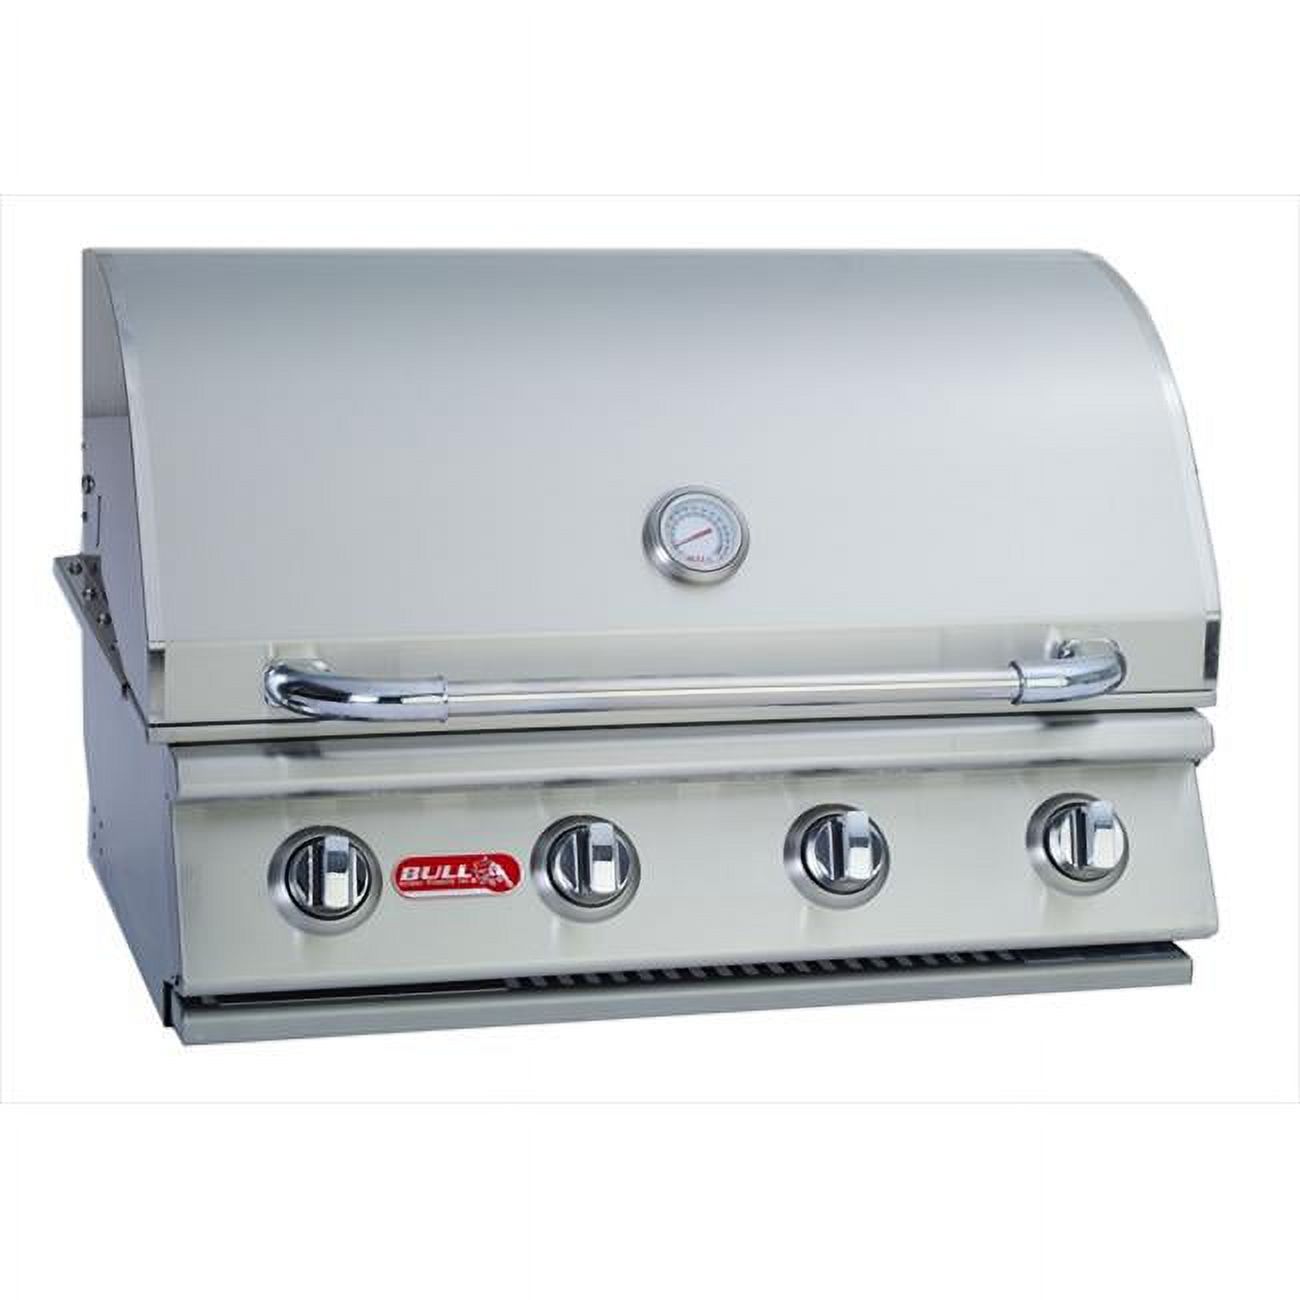 Bull Outdoor Products Outlaw 4-Burner Built-In Propane Gas Grill - image 1 of 2